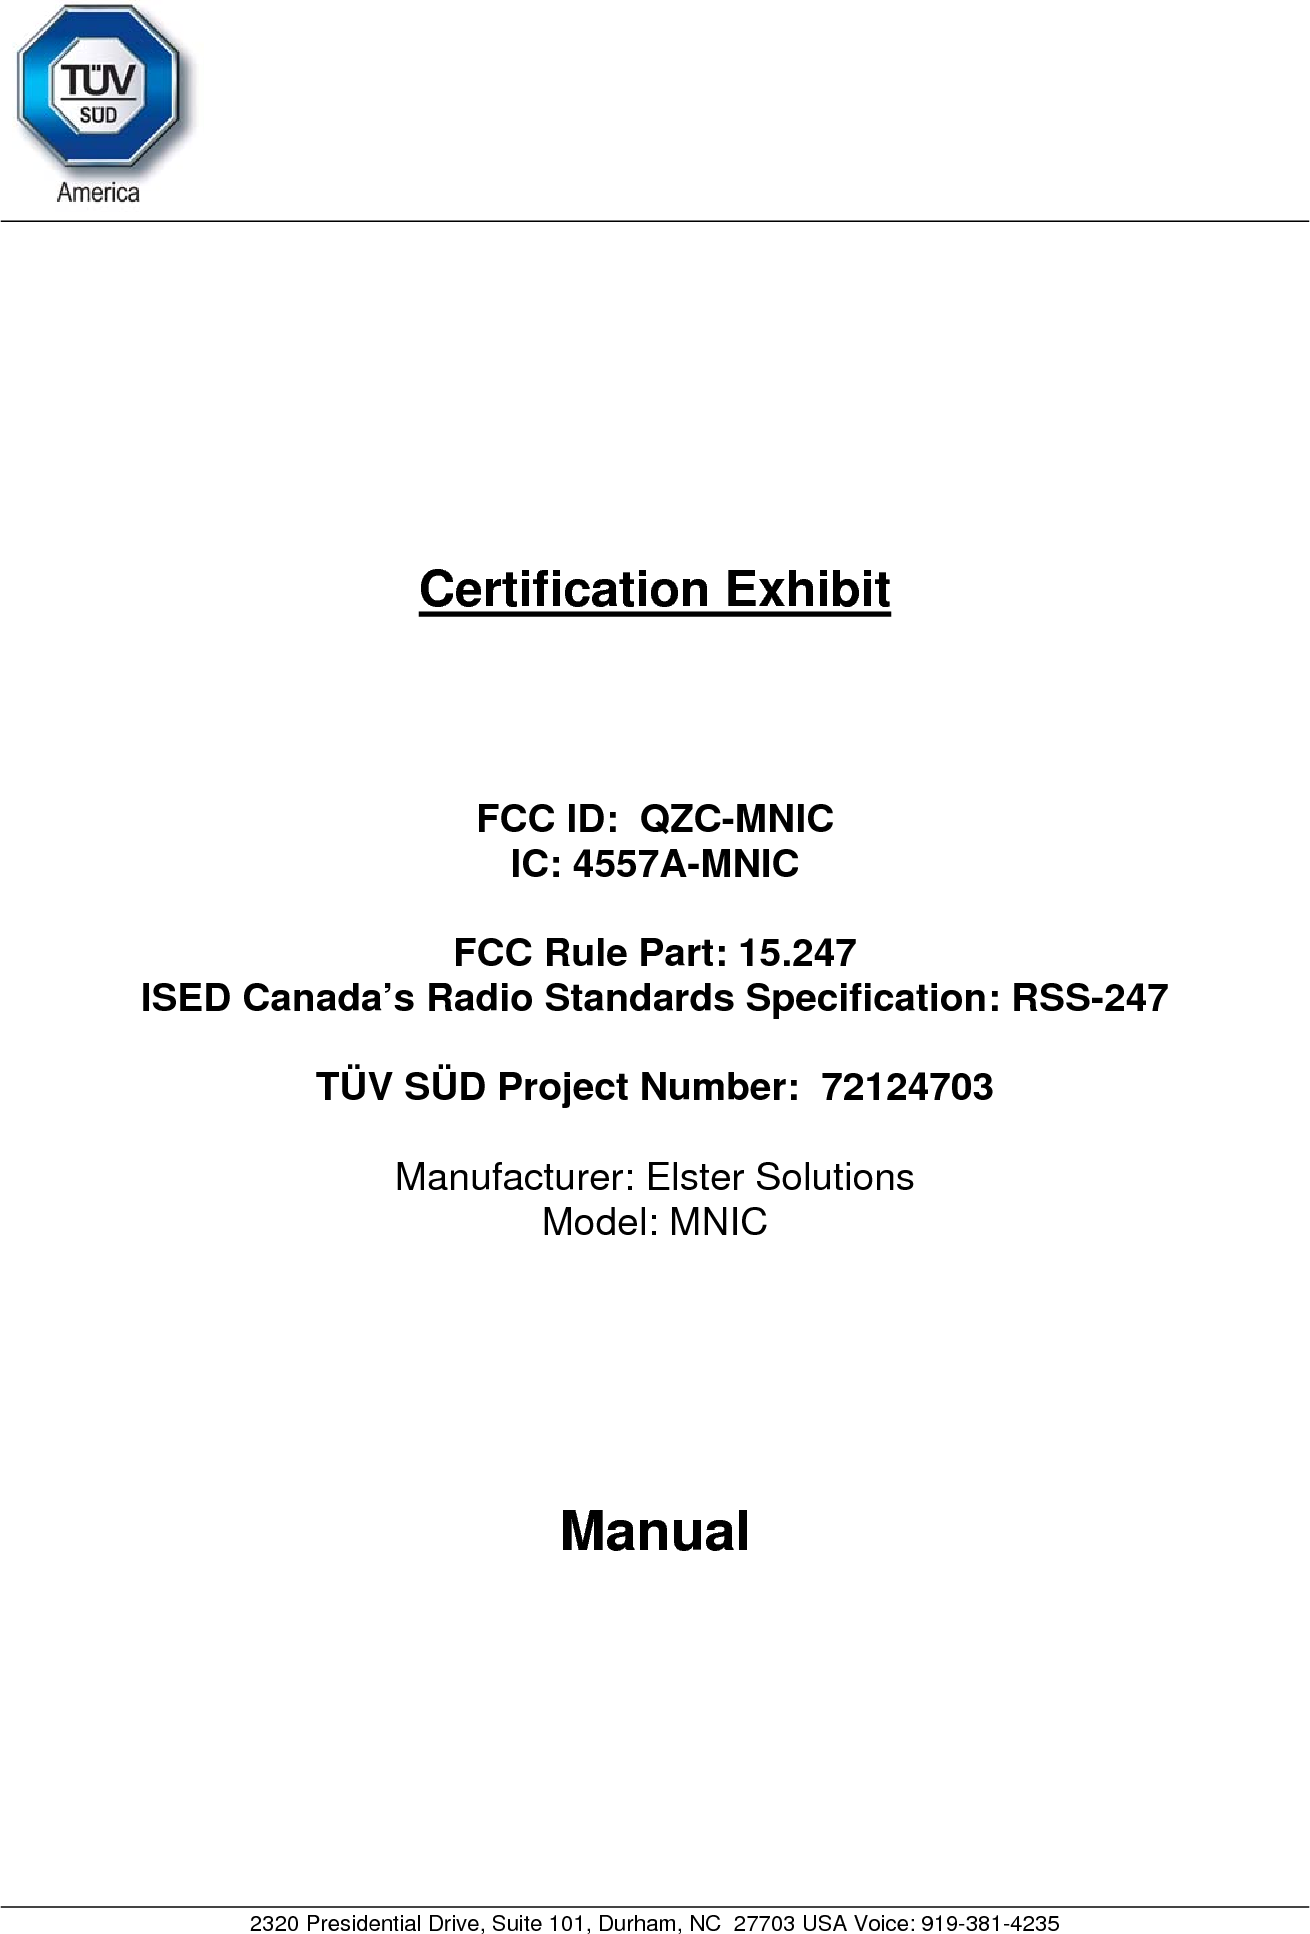    2320 Presidential Drive, Suite 101, Durham, NC  27703 USA Voice: 919-381-4235     Certification Exhibit     FCC ID:  QZC-MNIC IC: 4557A-MNIC  FCC Rule Part: 15.247 ISED Canada’s Radio Standards Specification: RSS-247  TÜV SÜD Project Number:  72124703   Manufacturer: Elster Solutions Model: MNIC     Manual  